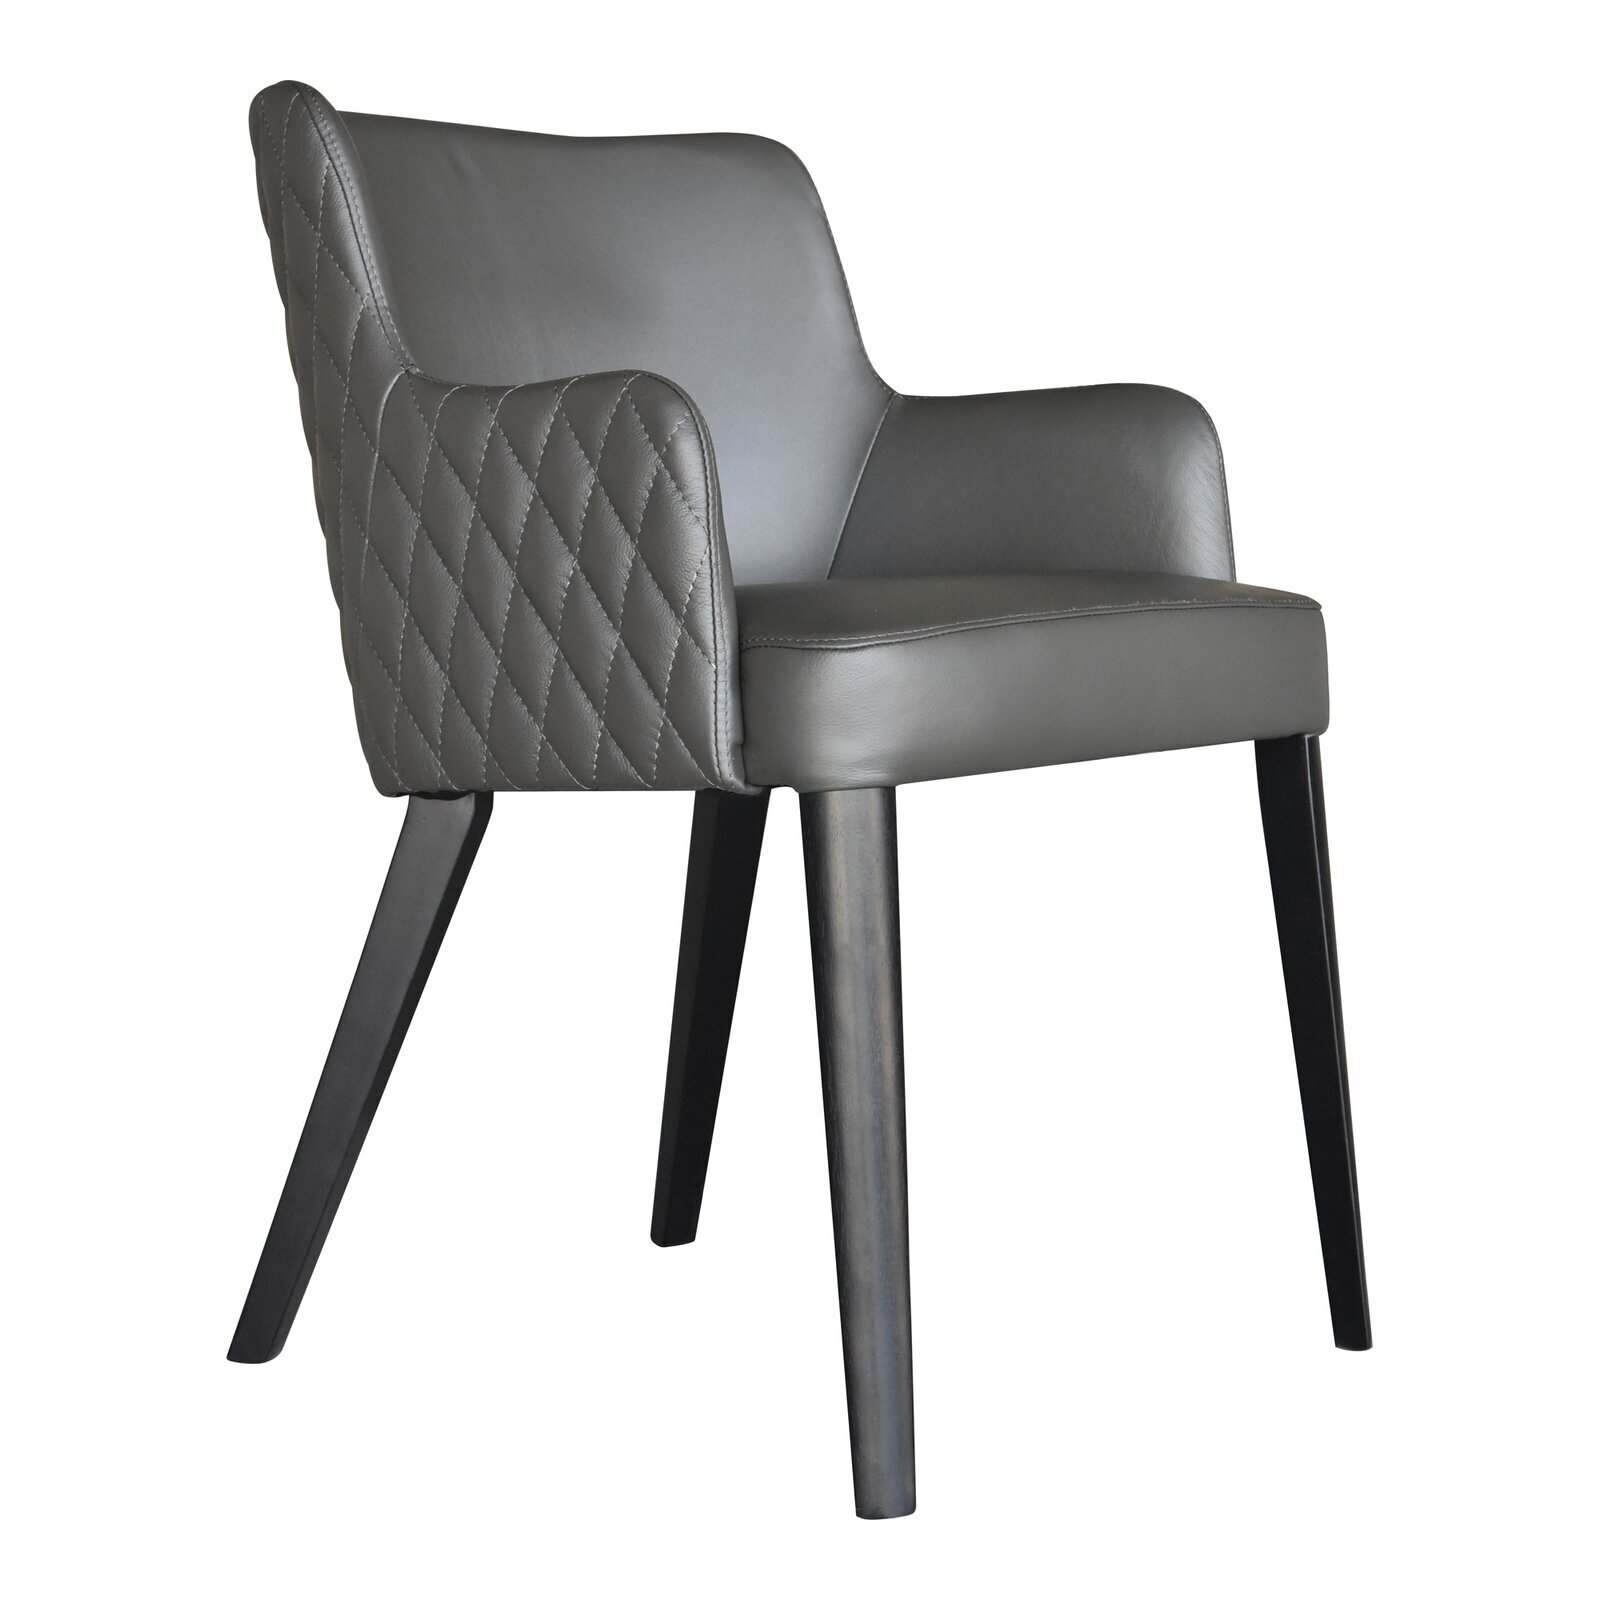 Studio Style Modern Leather Dining Room Chairs